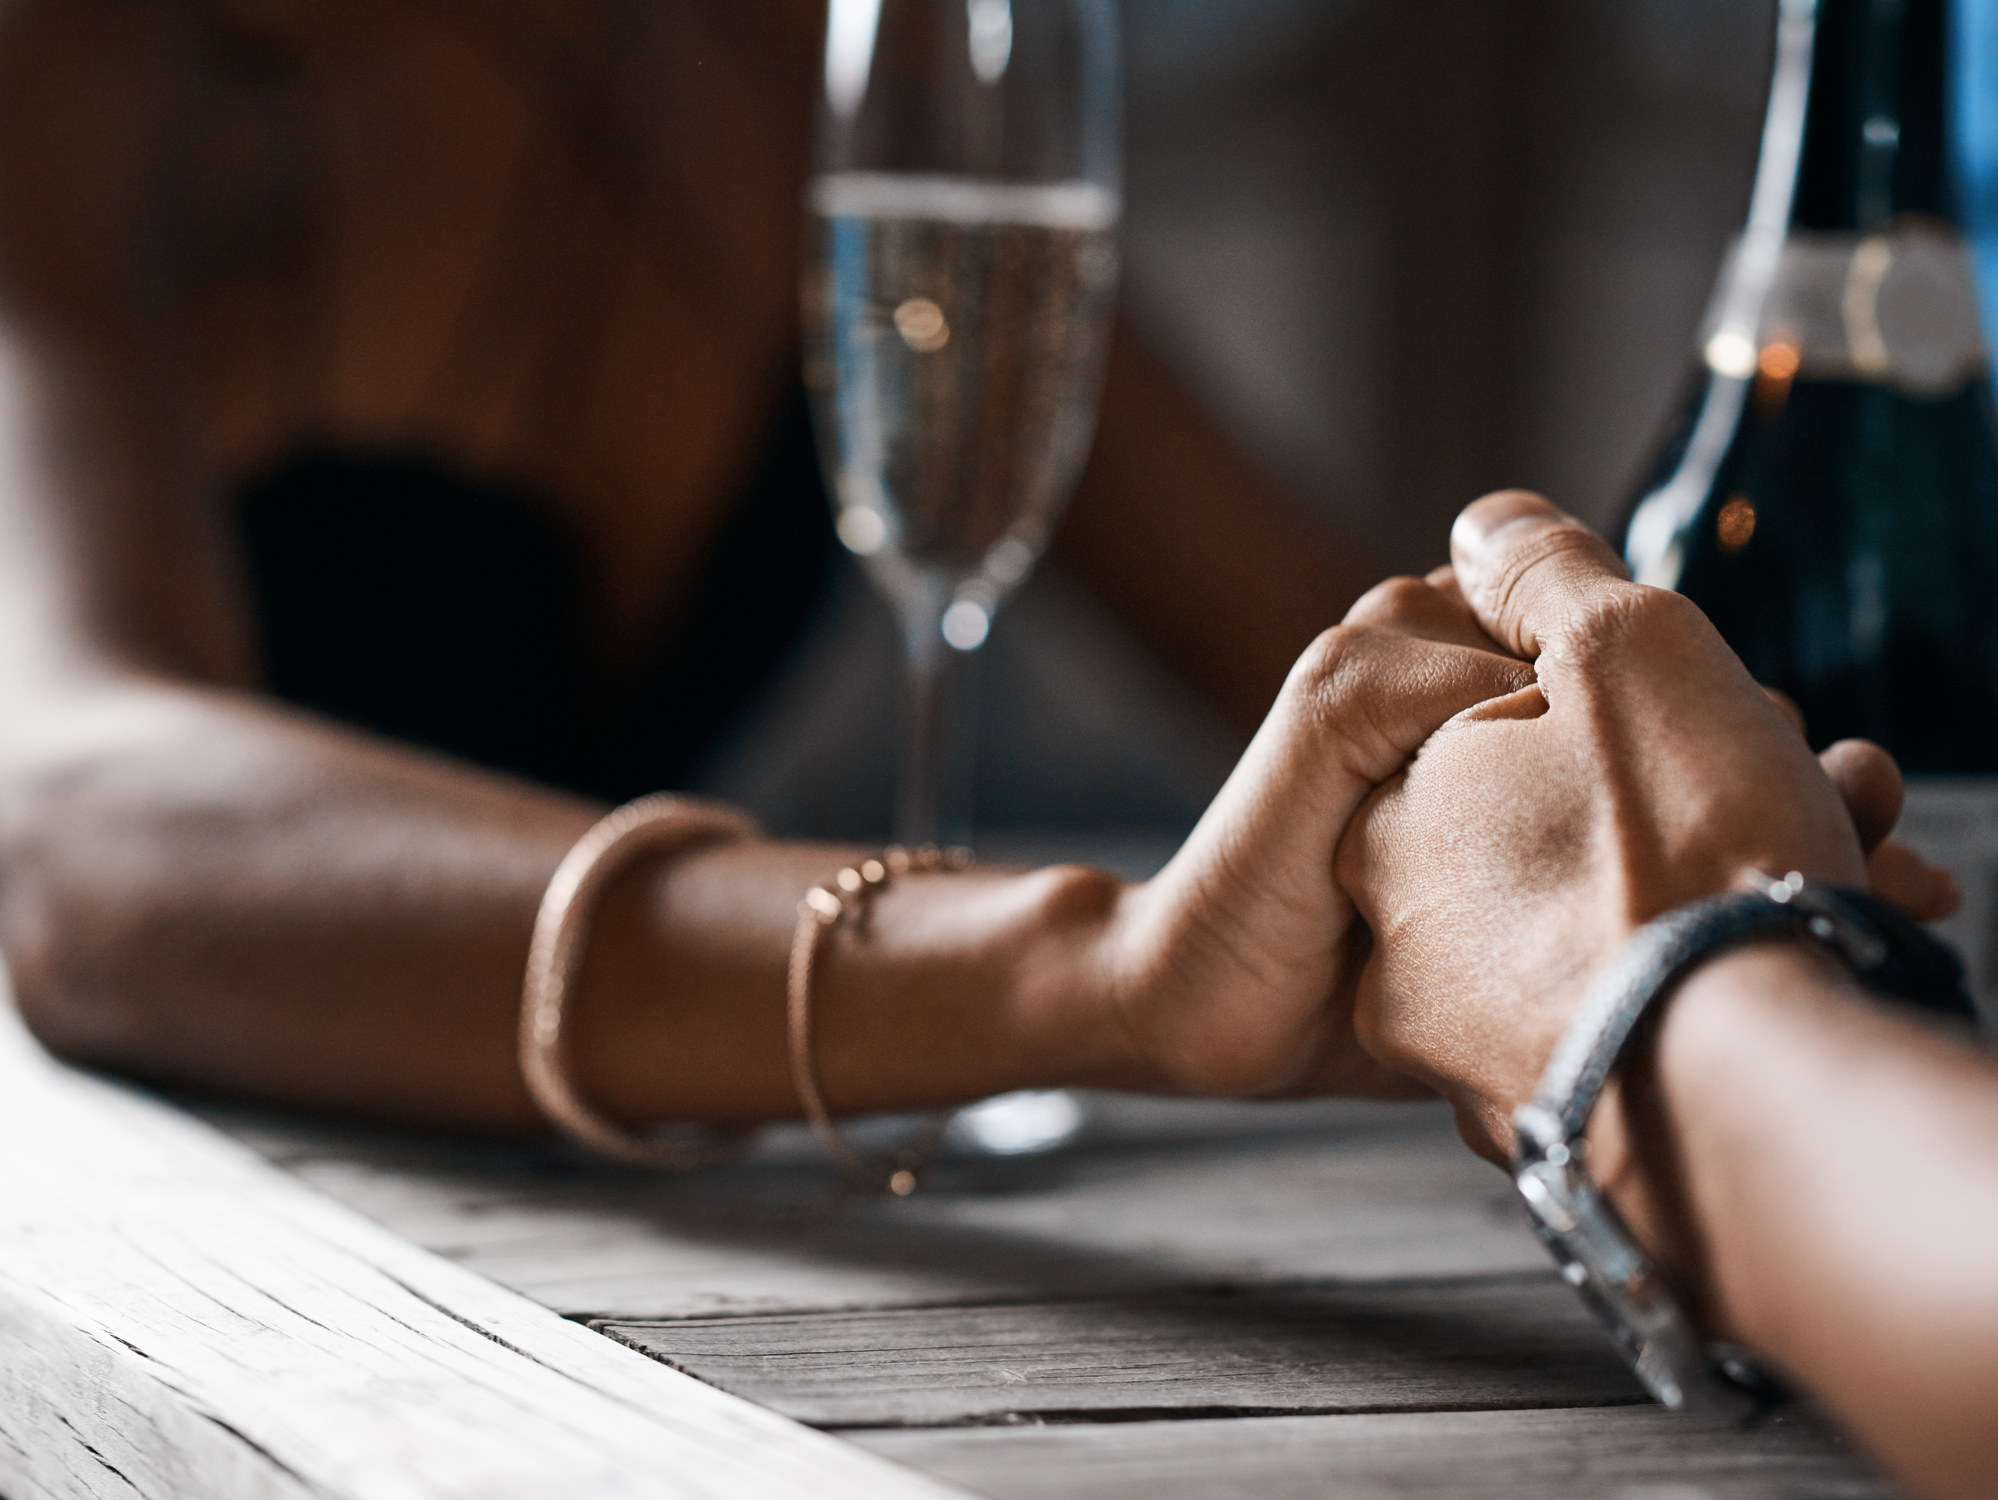 A couple holds hands at dinner